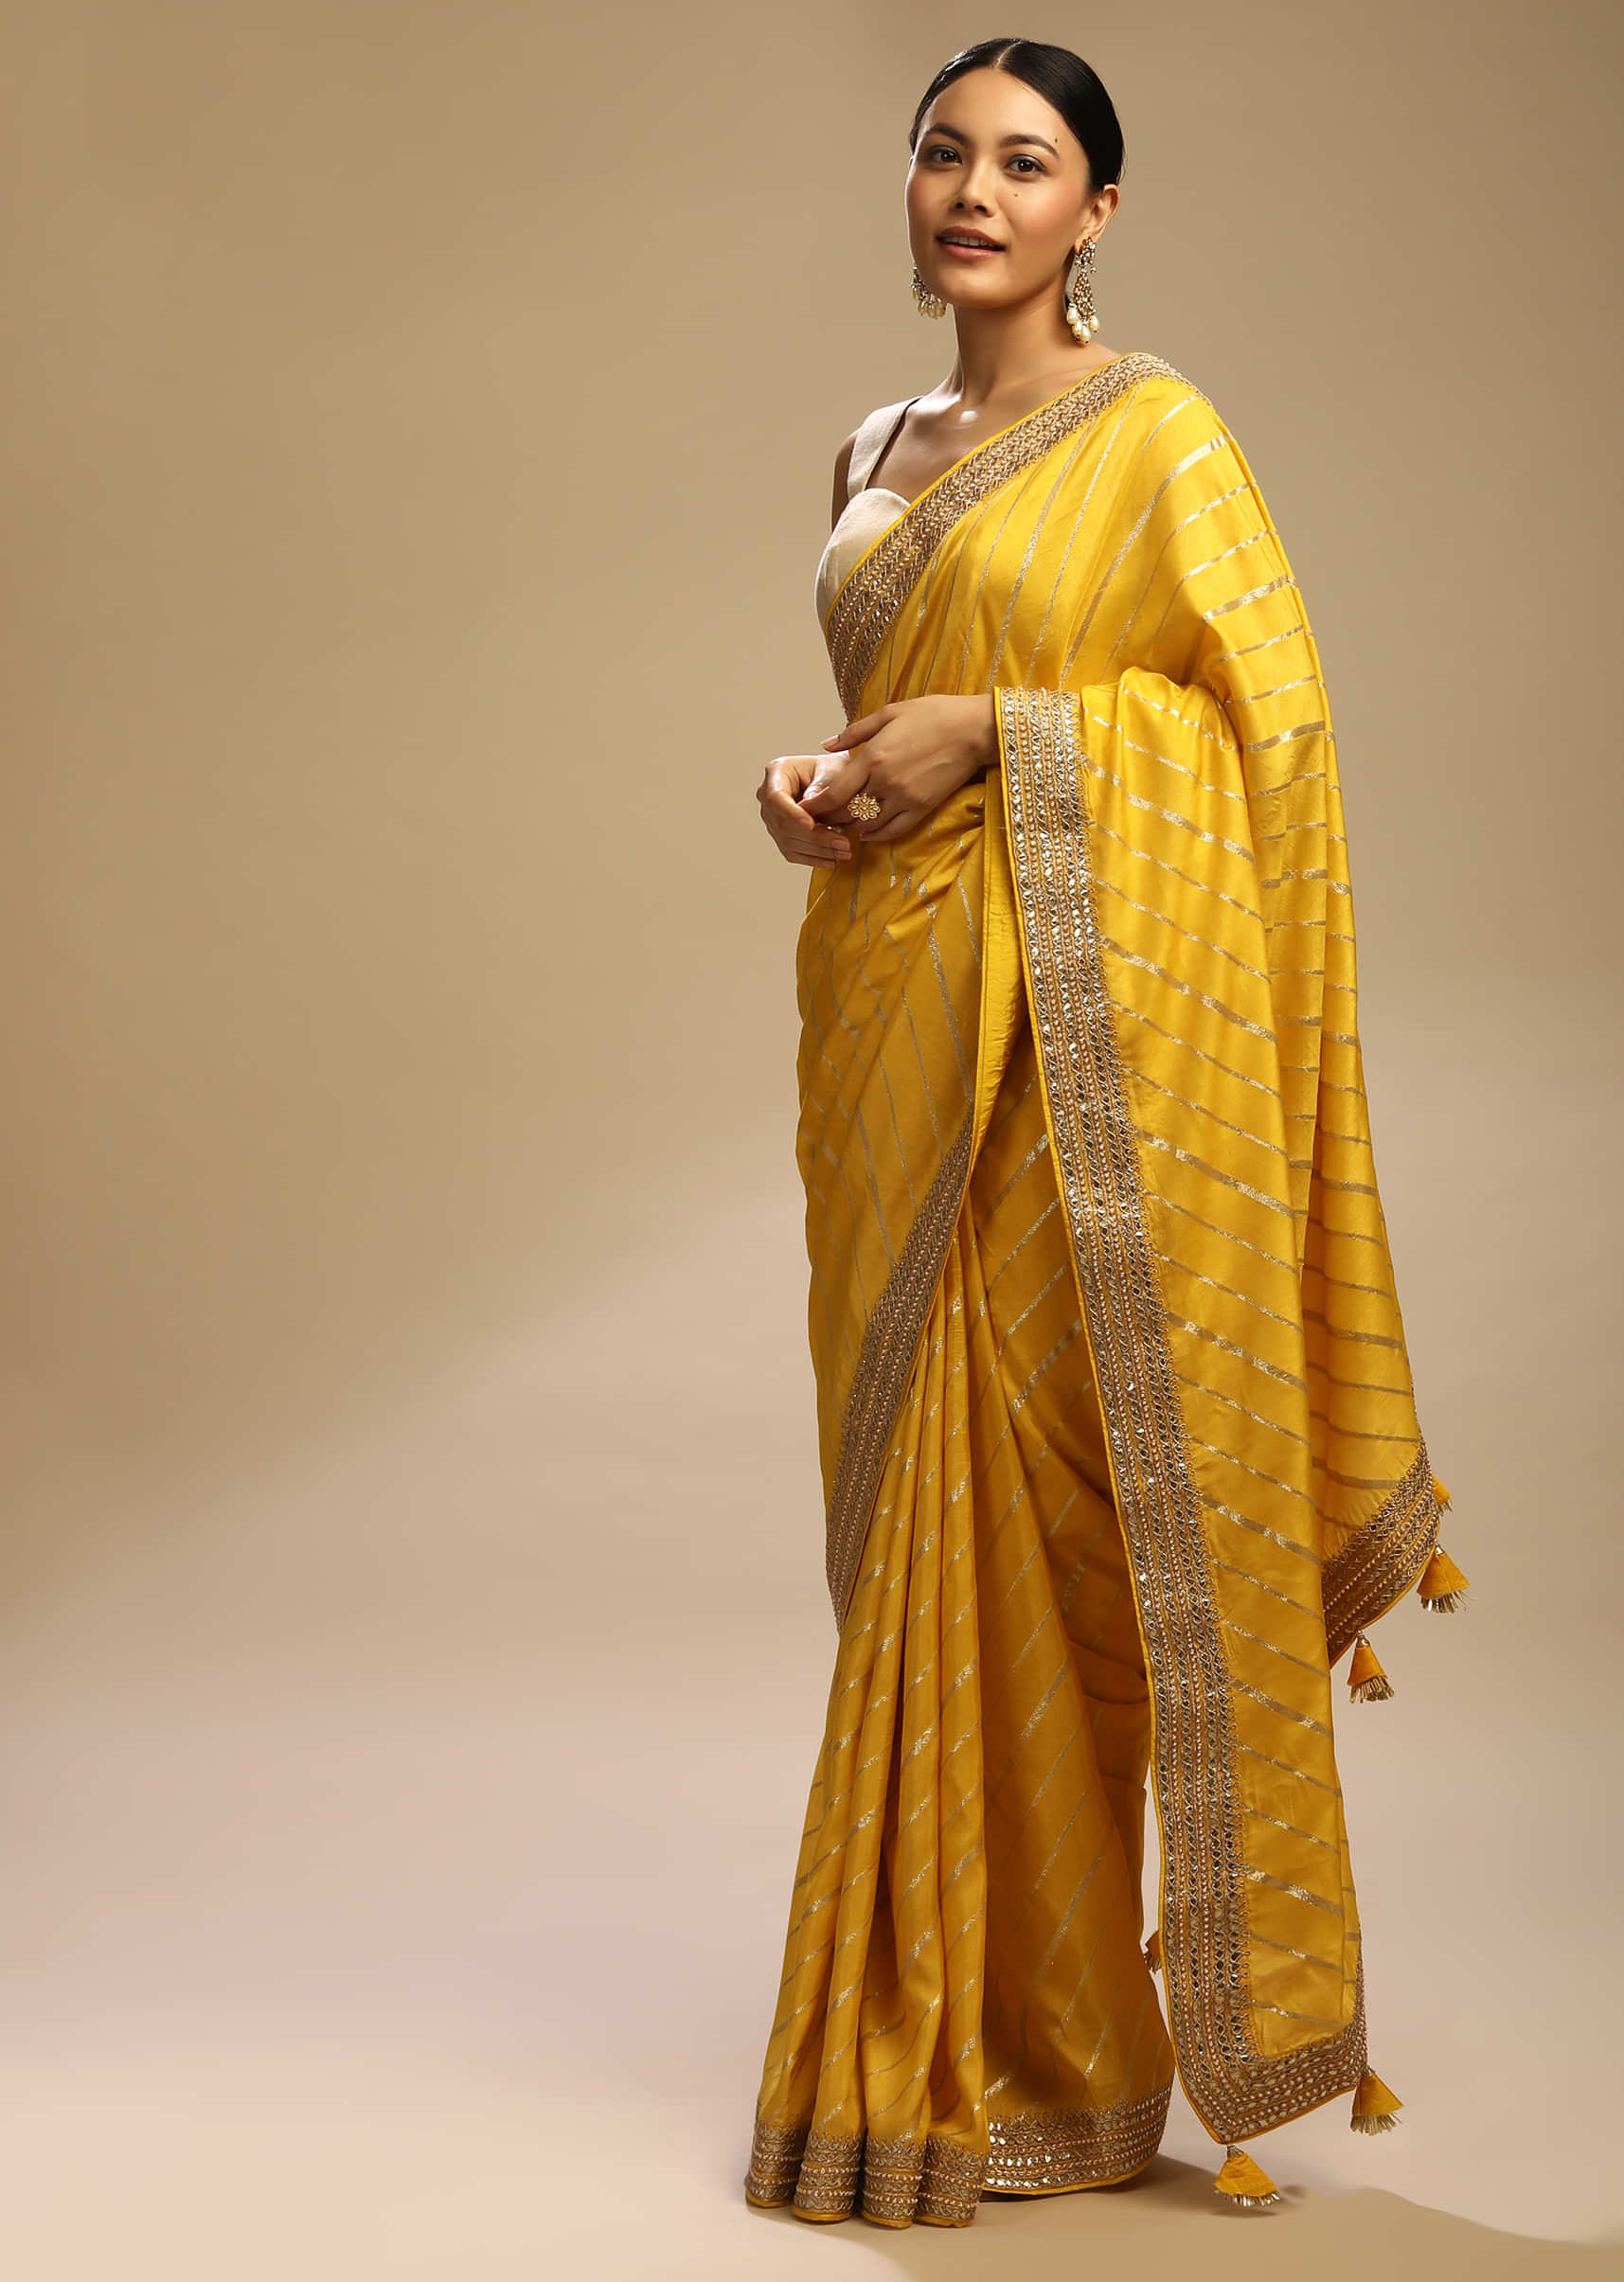 Dandelion Yellow Saree In Dupion Silk With Woven Diagonal Stripes And Gotta Embroidered Border